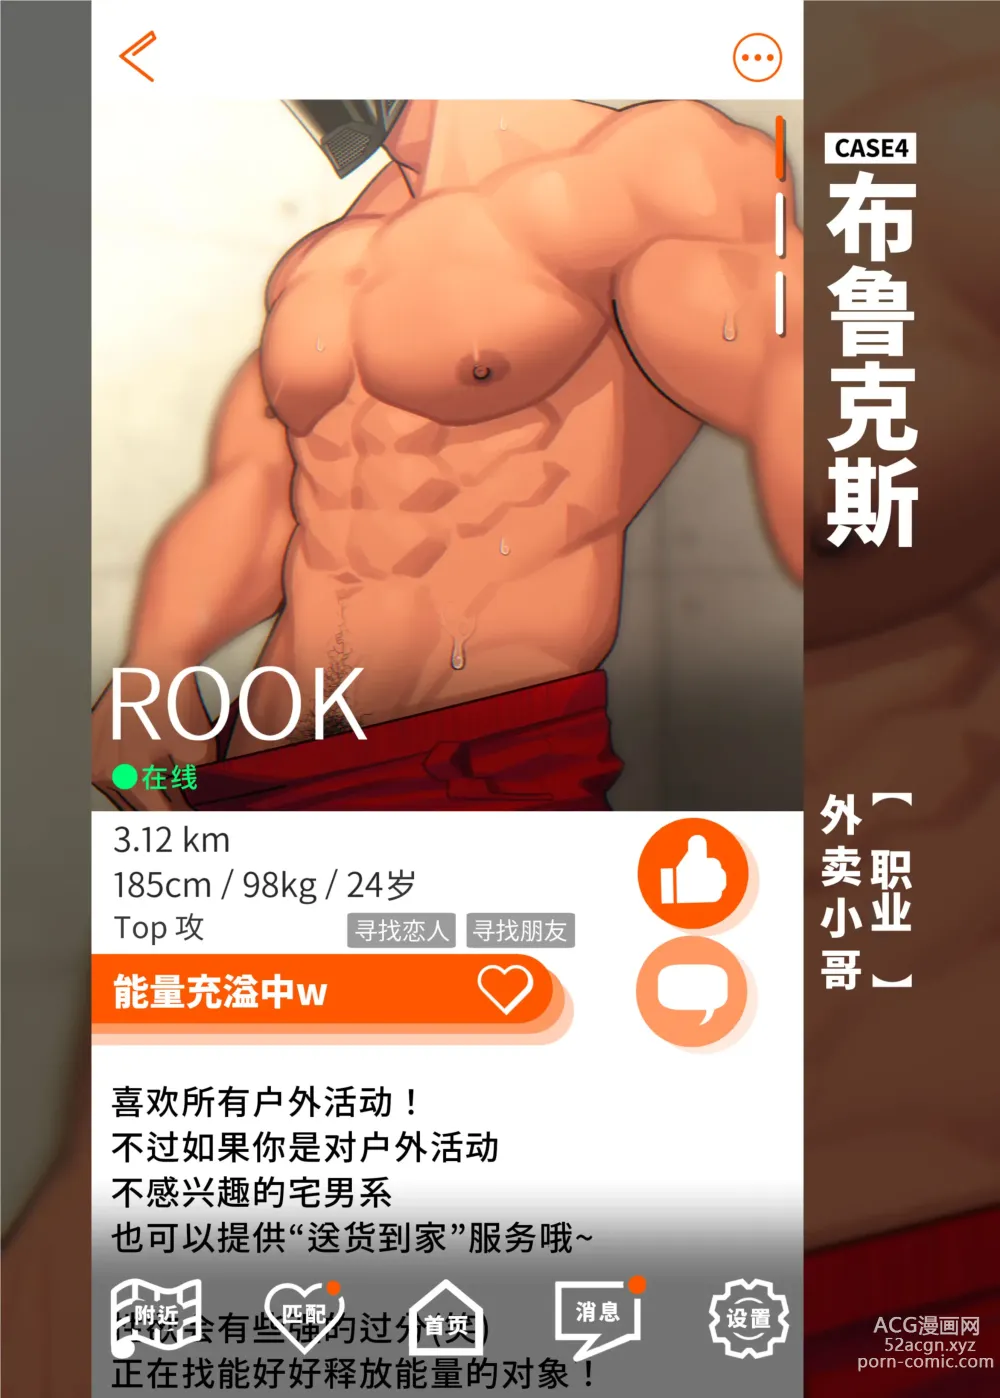 Page 16 of doujinshi Swipe and play｜滑动解锁阅后即干 (decensored)